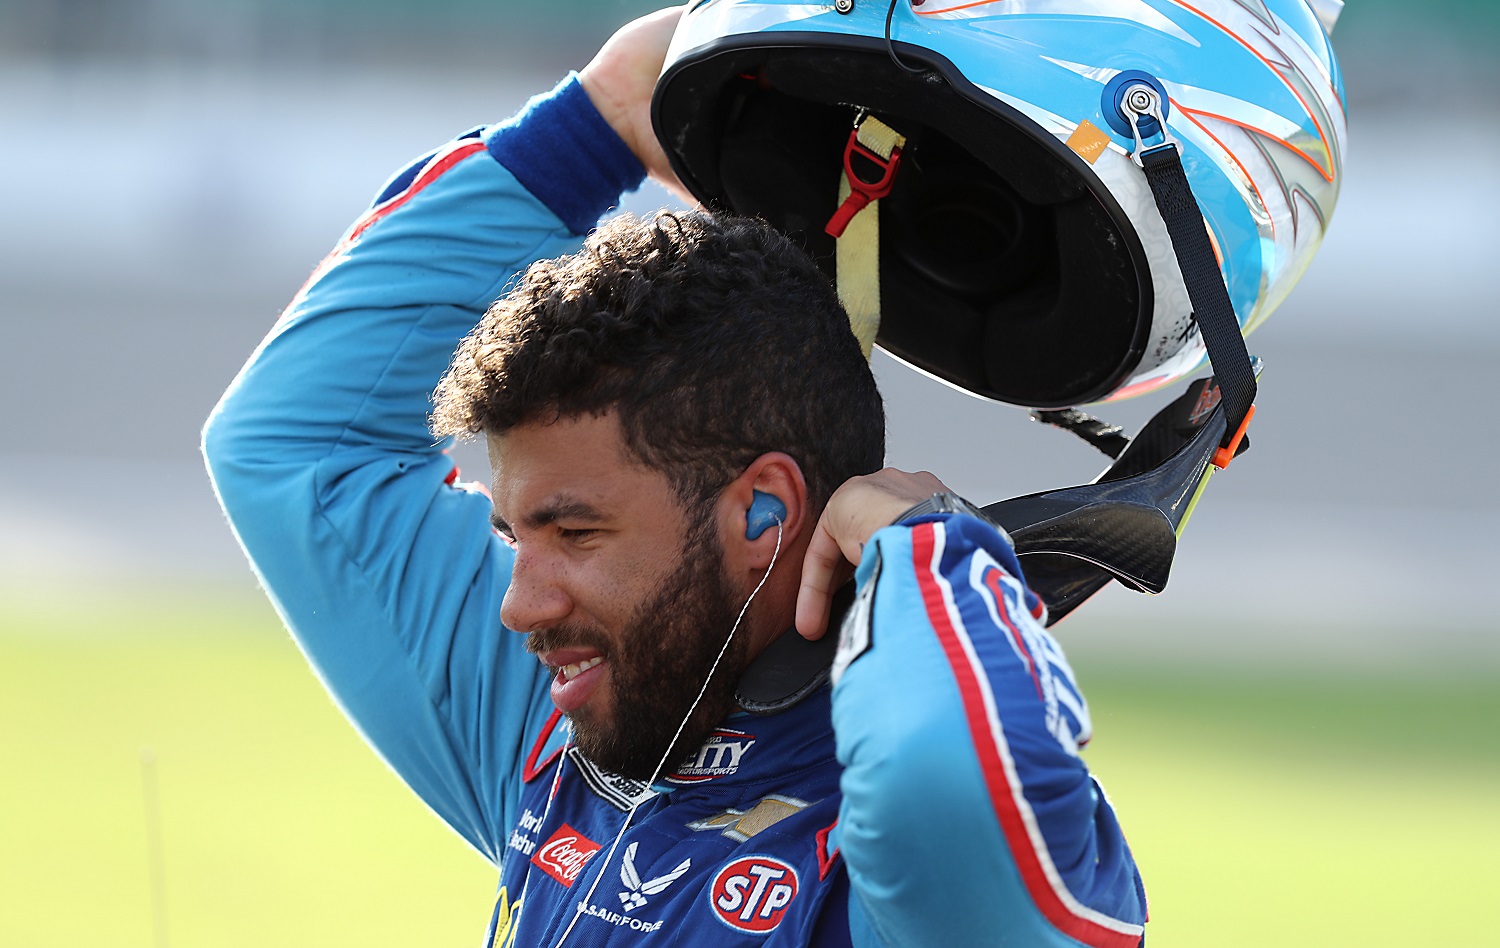 Bubba Wallace has moved to the 23XI Racing team owner by Michael Jordan and Denny Hamlin for the 2021 NASCAR season